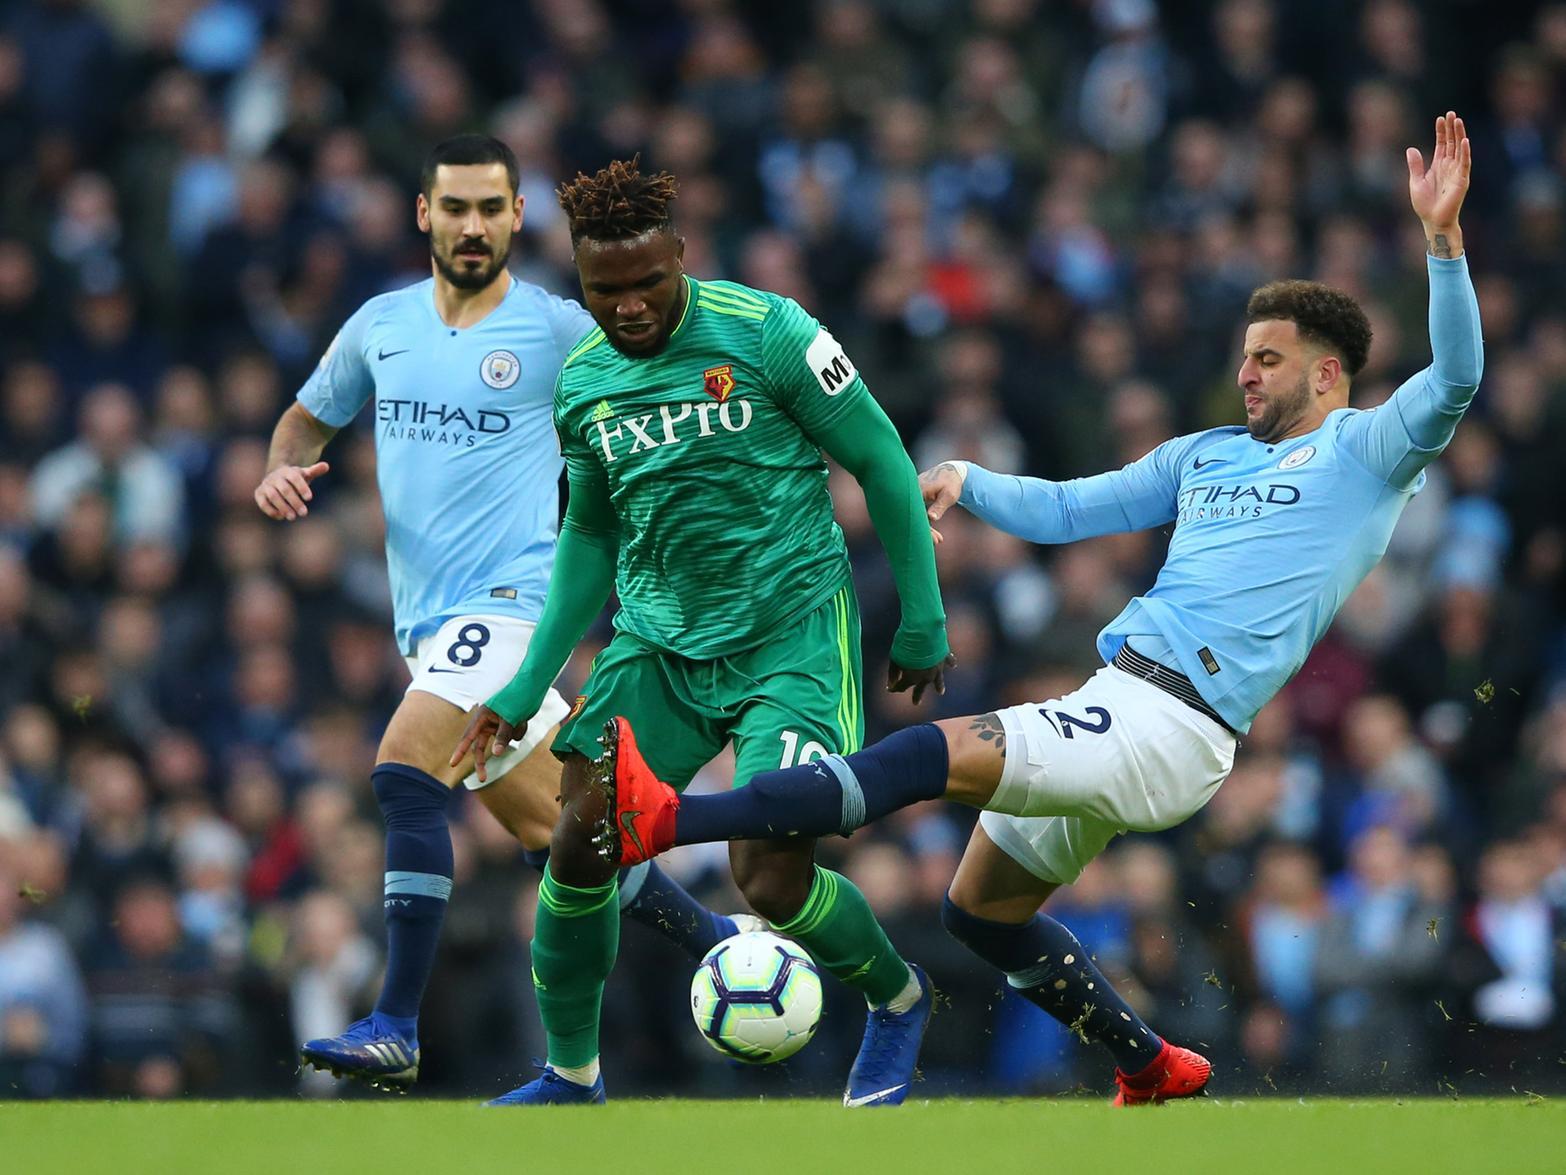 Cardiff City and Anderlecht are set to go toe-to-toe in the race to land Watford starlet Isaac Success, who is likely to be let out on loan to get some invaluable first team experience. (Wales Online)